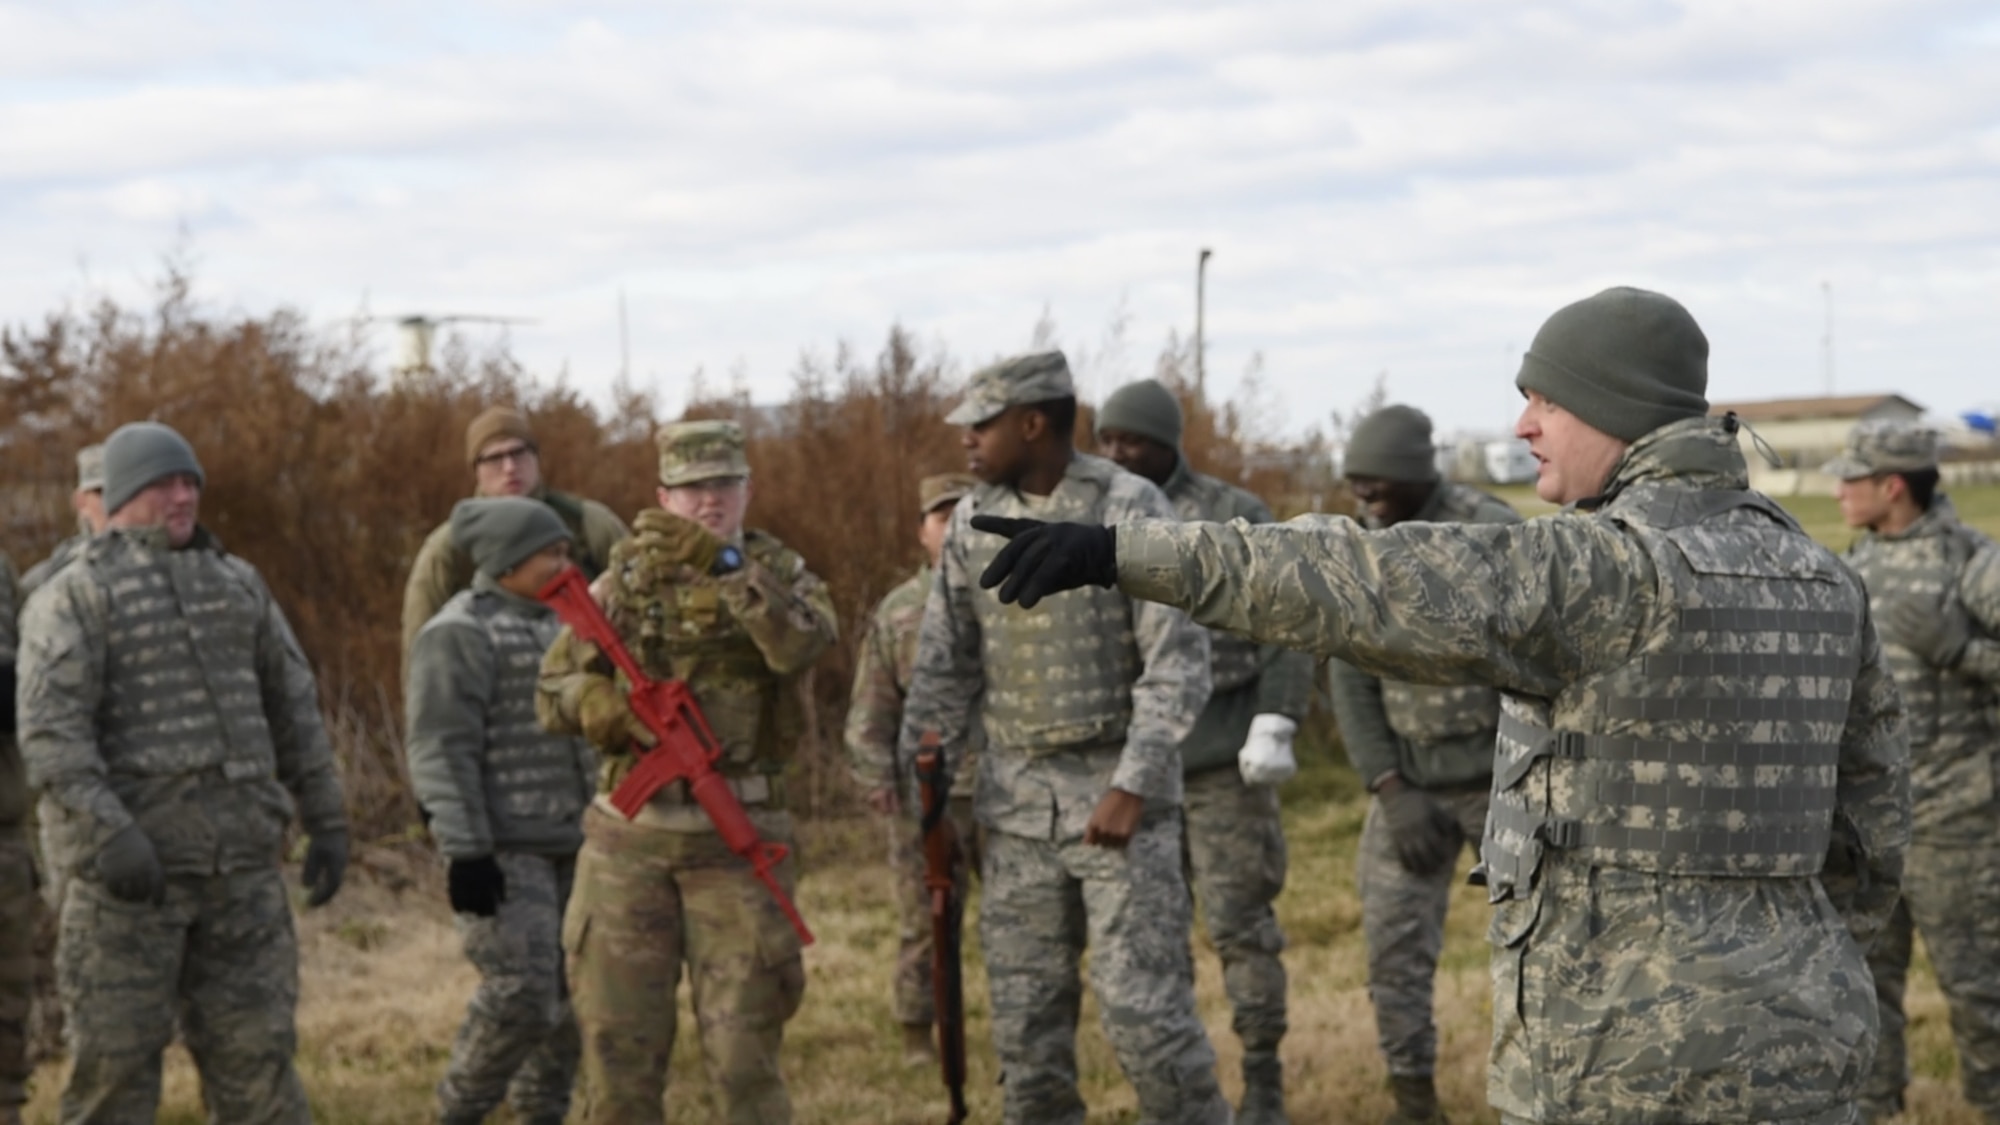 Tech. Sgt. Casey Reed, 436th Civil Engineer Squadron unit deployment manager, directs a group of Airmen for the Individual Movement Techniques portion of Prime Base Engineer Emergency Force (Prime BEEF) Day on Nov. 28, 2018, at Dover Air Force Base, Del. Prime BEEF Day is a squadron-wide training day focused on maintaining and refreshing all civil engineering Airmen on readiness requirements and operational capabilities. (U.S. Photo by Airman First Class Dedan D. Dials)